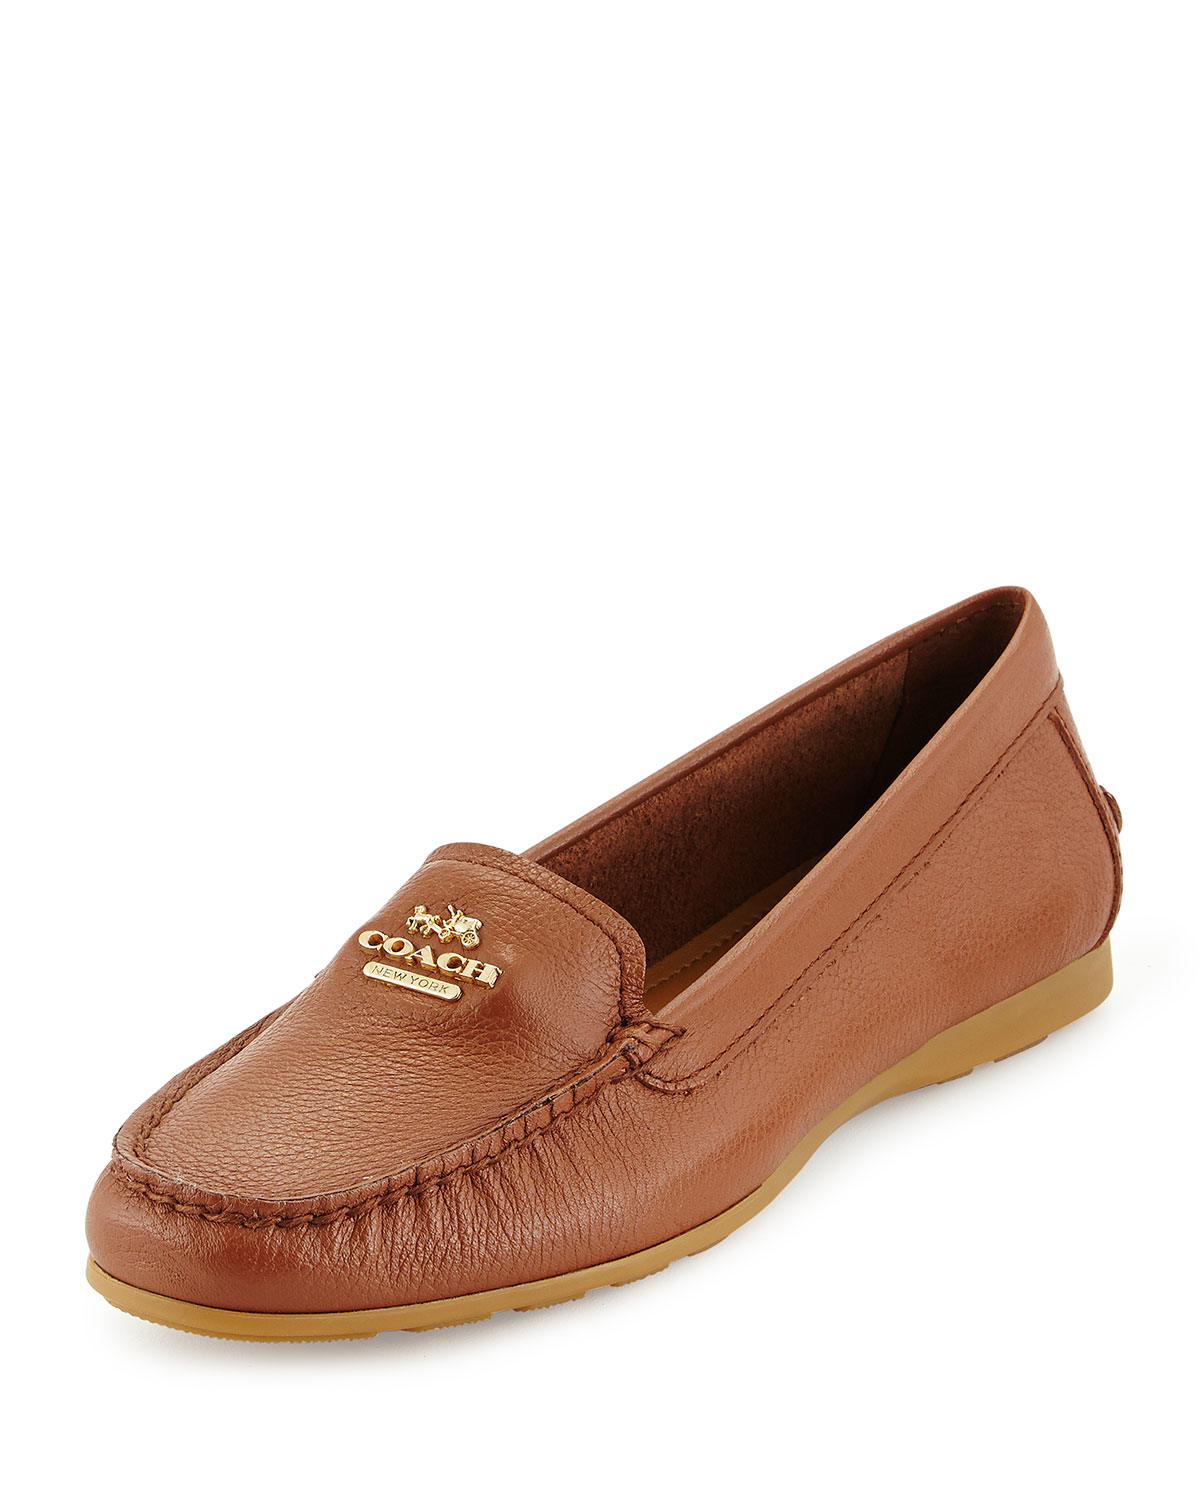 Lyst - Coach Opal Leather Loafer in Brown